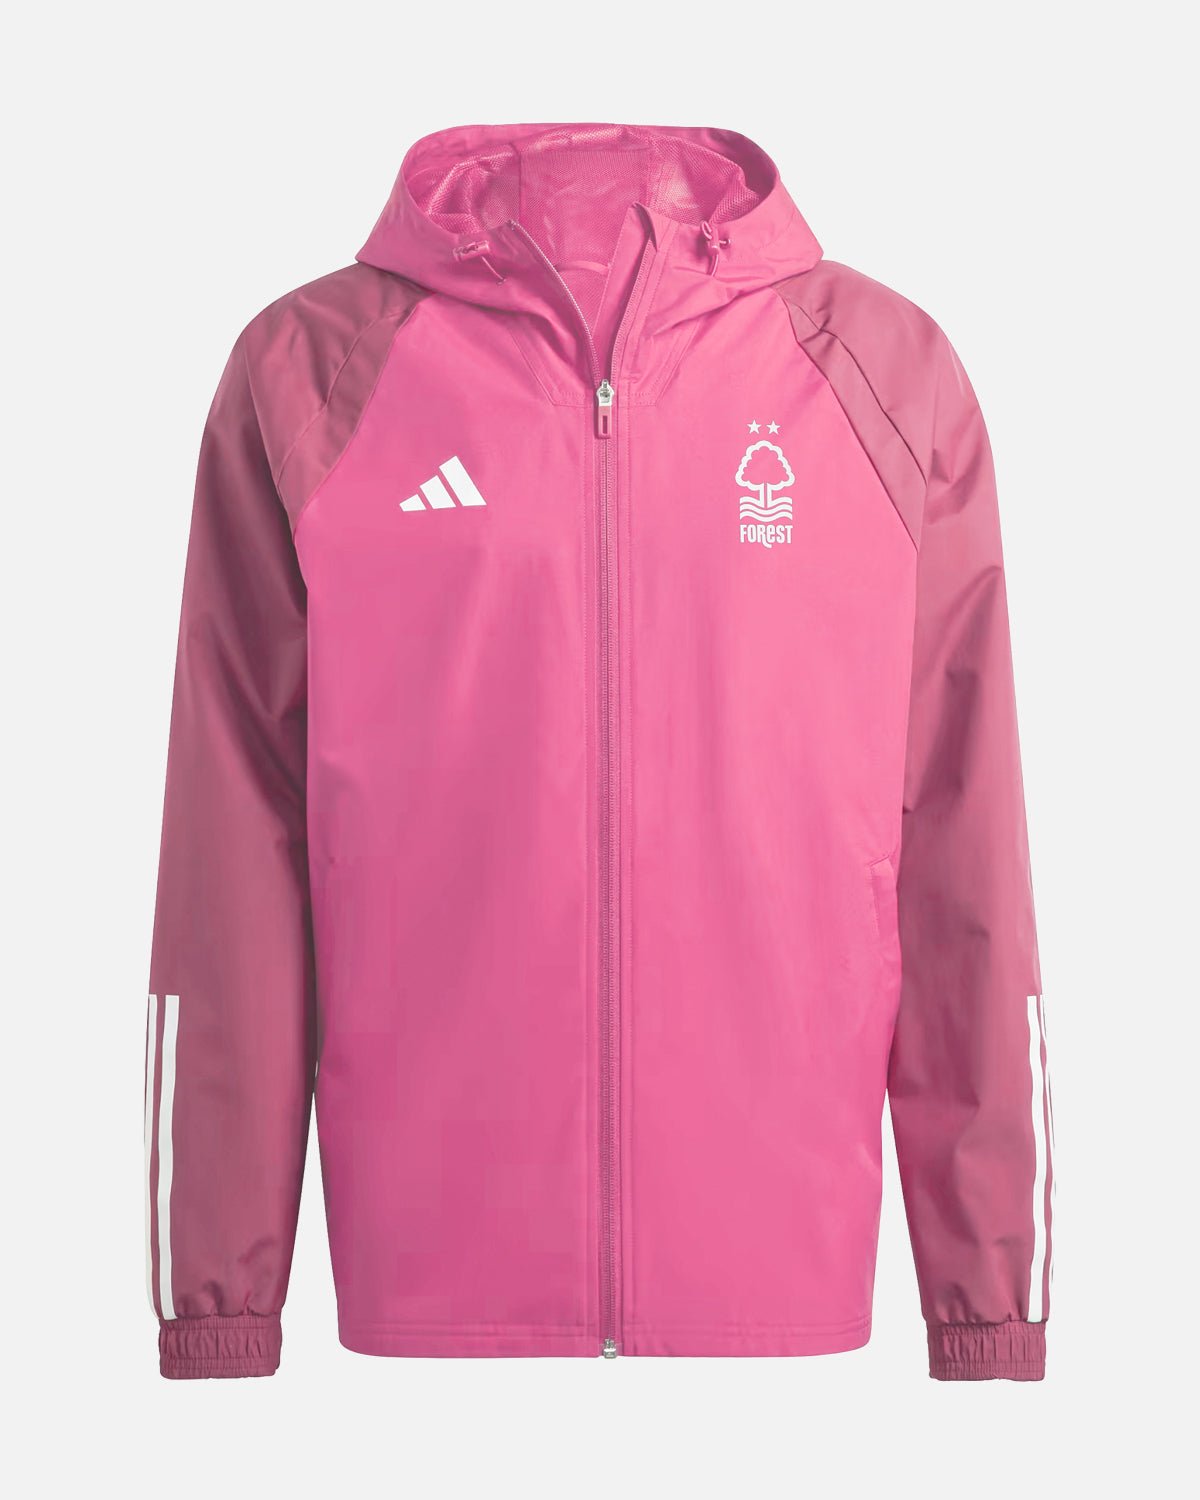 NFFC Pink All Weather Warm Up Jacket 23-24 - Nottingham Forest FC